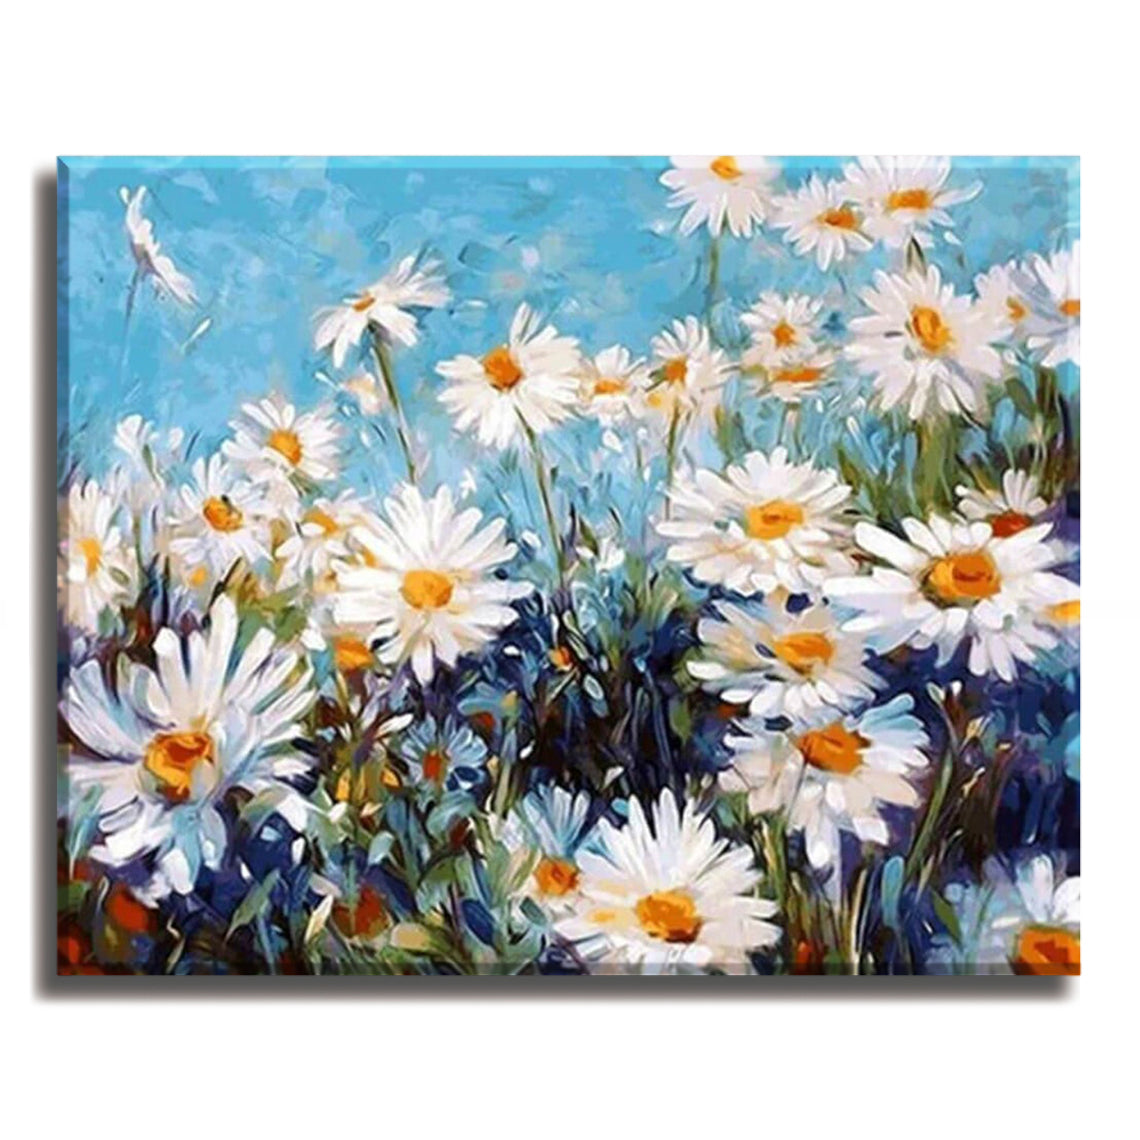 White Daisies - Paint by Numbers Kit for Adults DIY Oil Painting Kit on Canvas